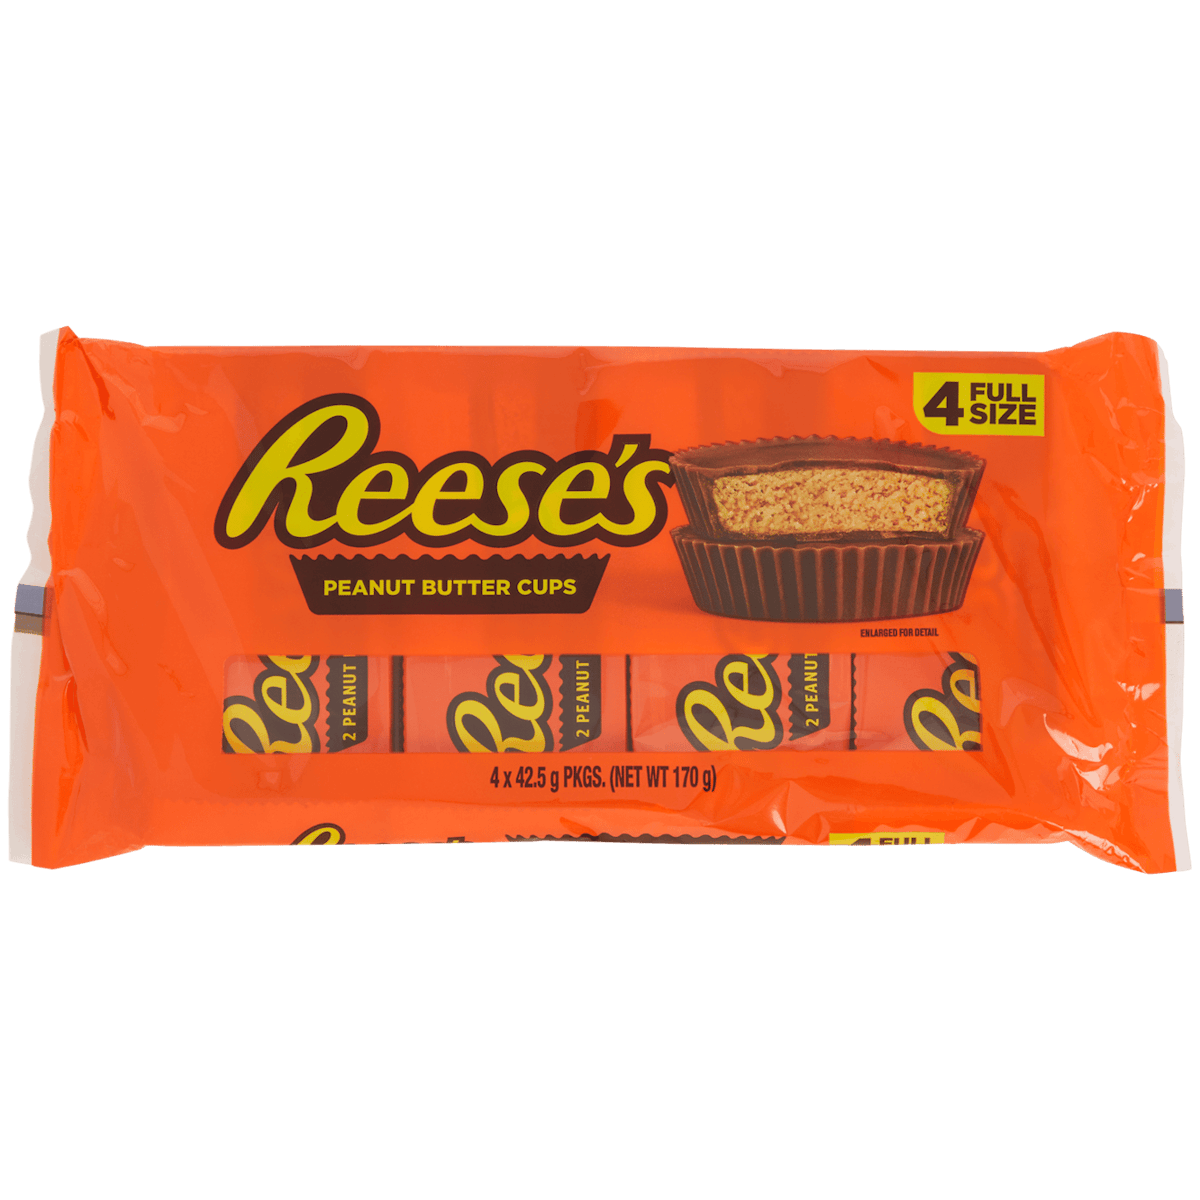 Reese's Peanut Butter Cups | Action.com